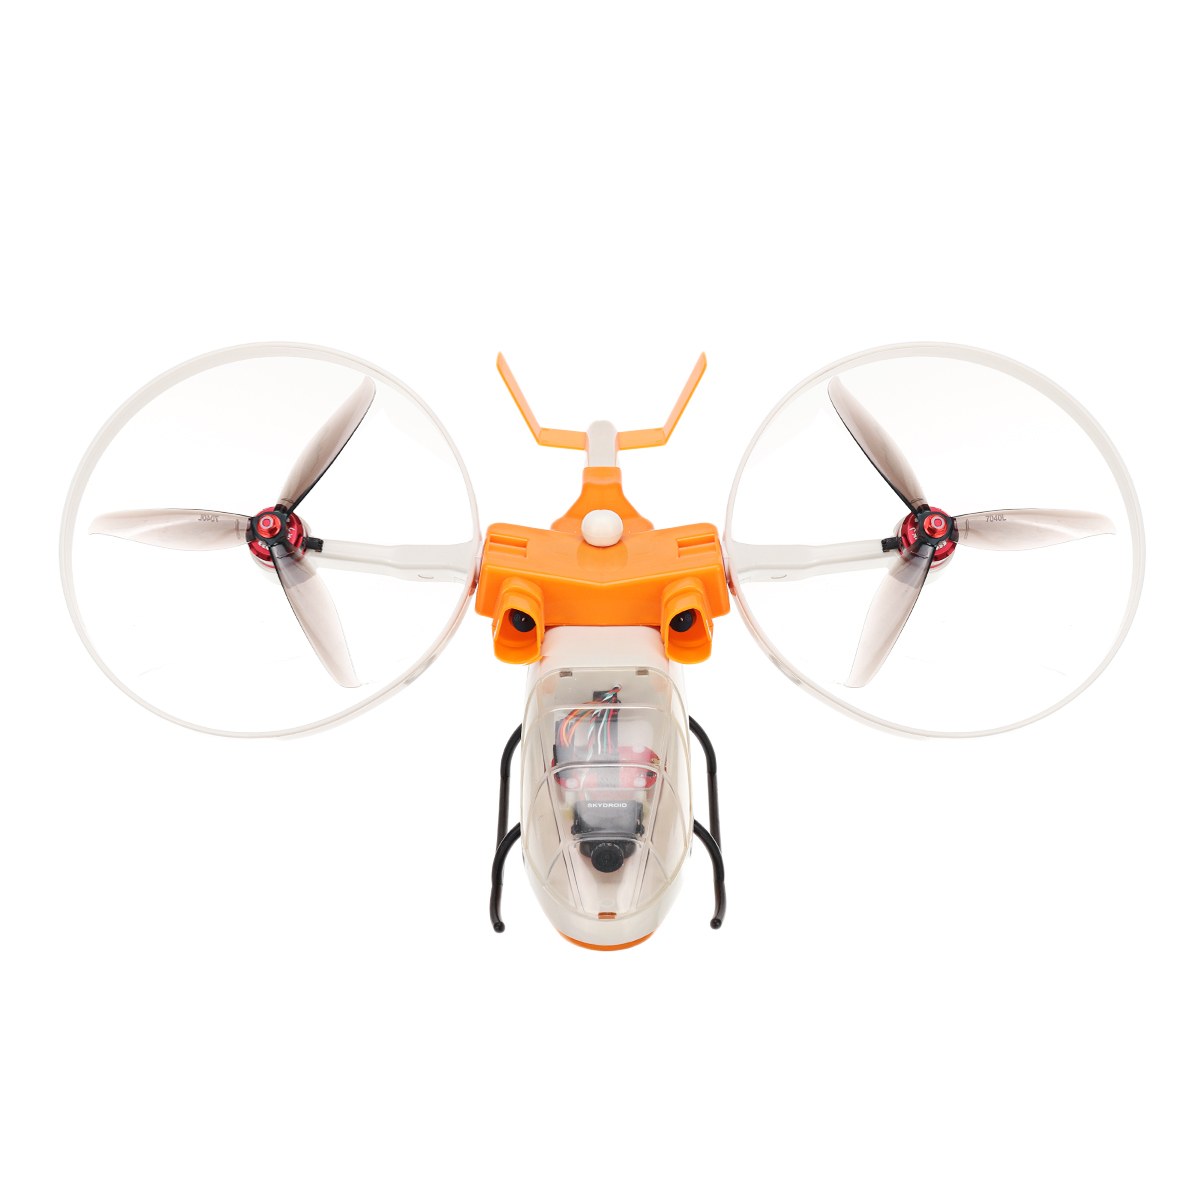 KY-Z2-6CH-Two-axis-Brushless-Helicopter-720P-FPV-RTF-Version-Support-Fixed-point-Fixed-altitude-Flig-1880504-12